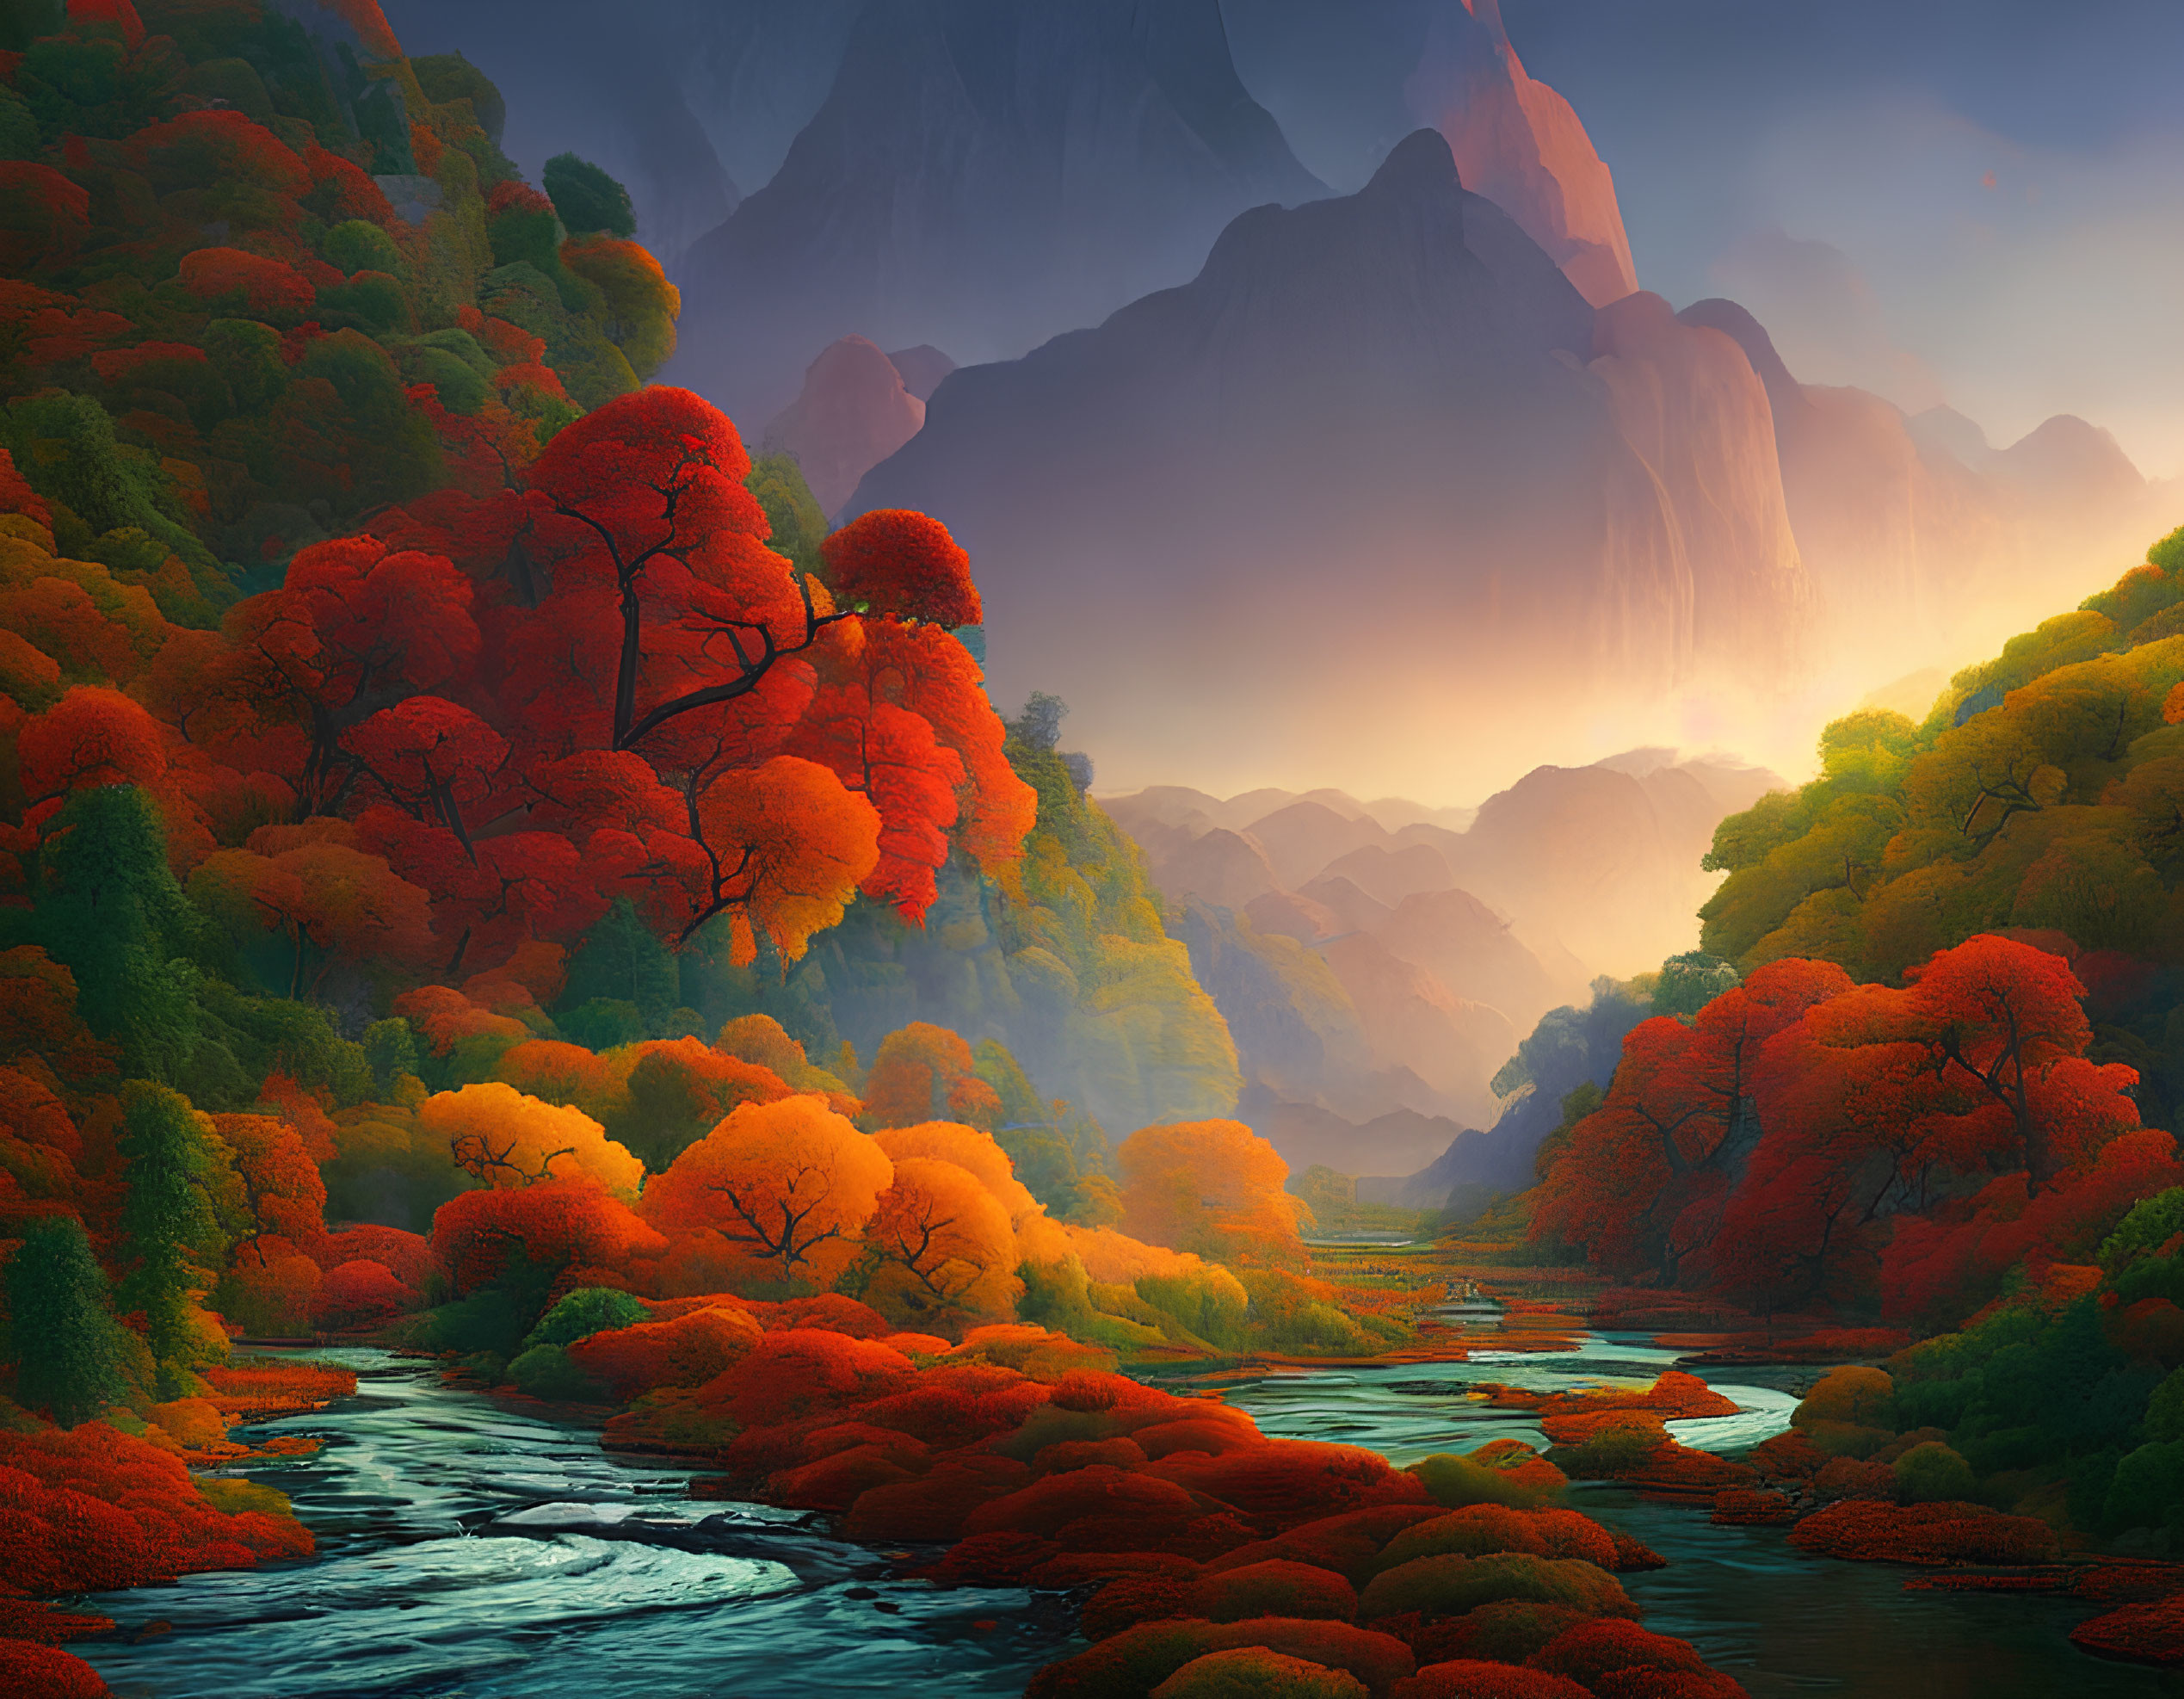 Scenic autumn landscape with river, forests, mountains, and sunlight